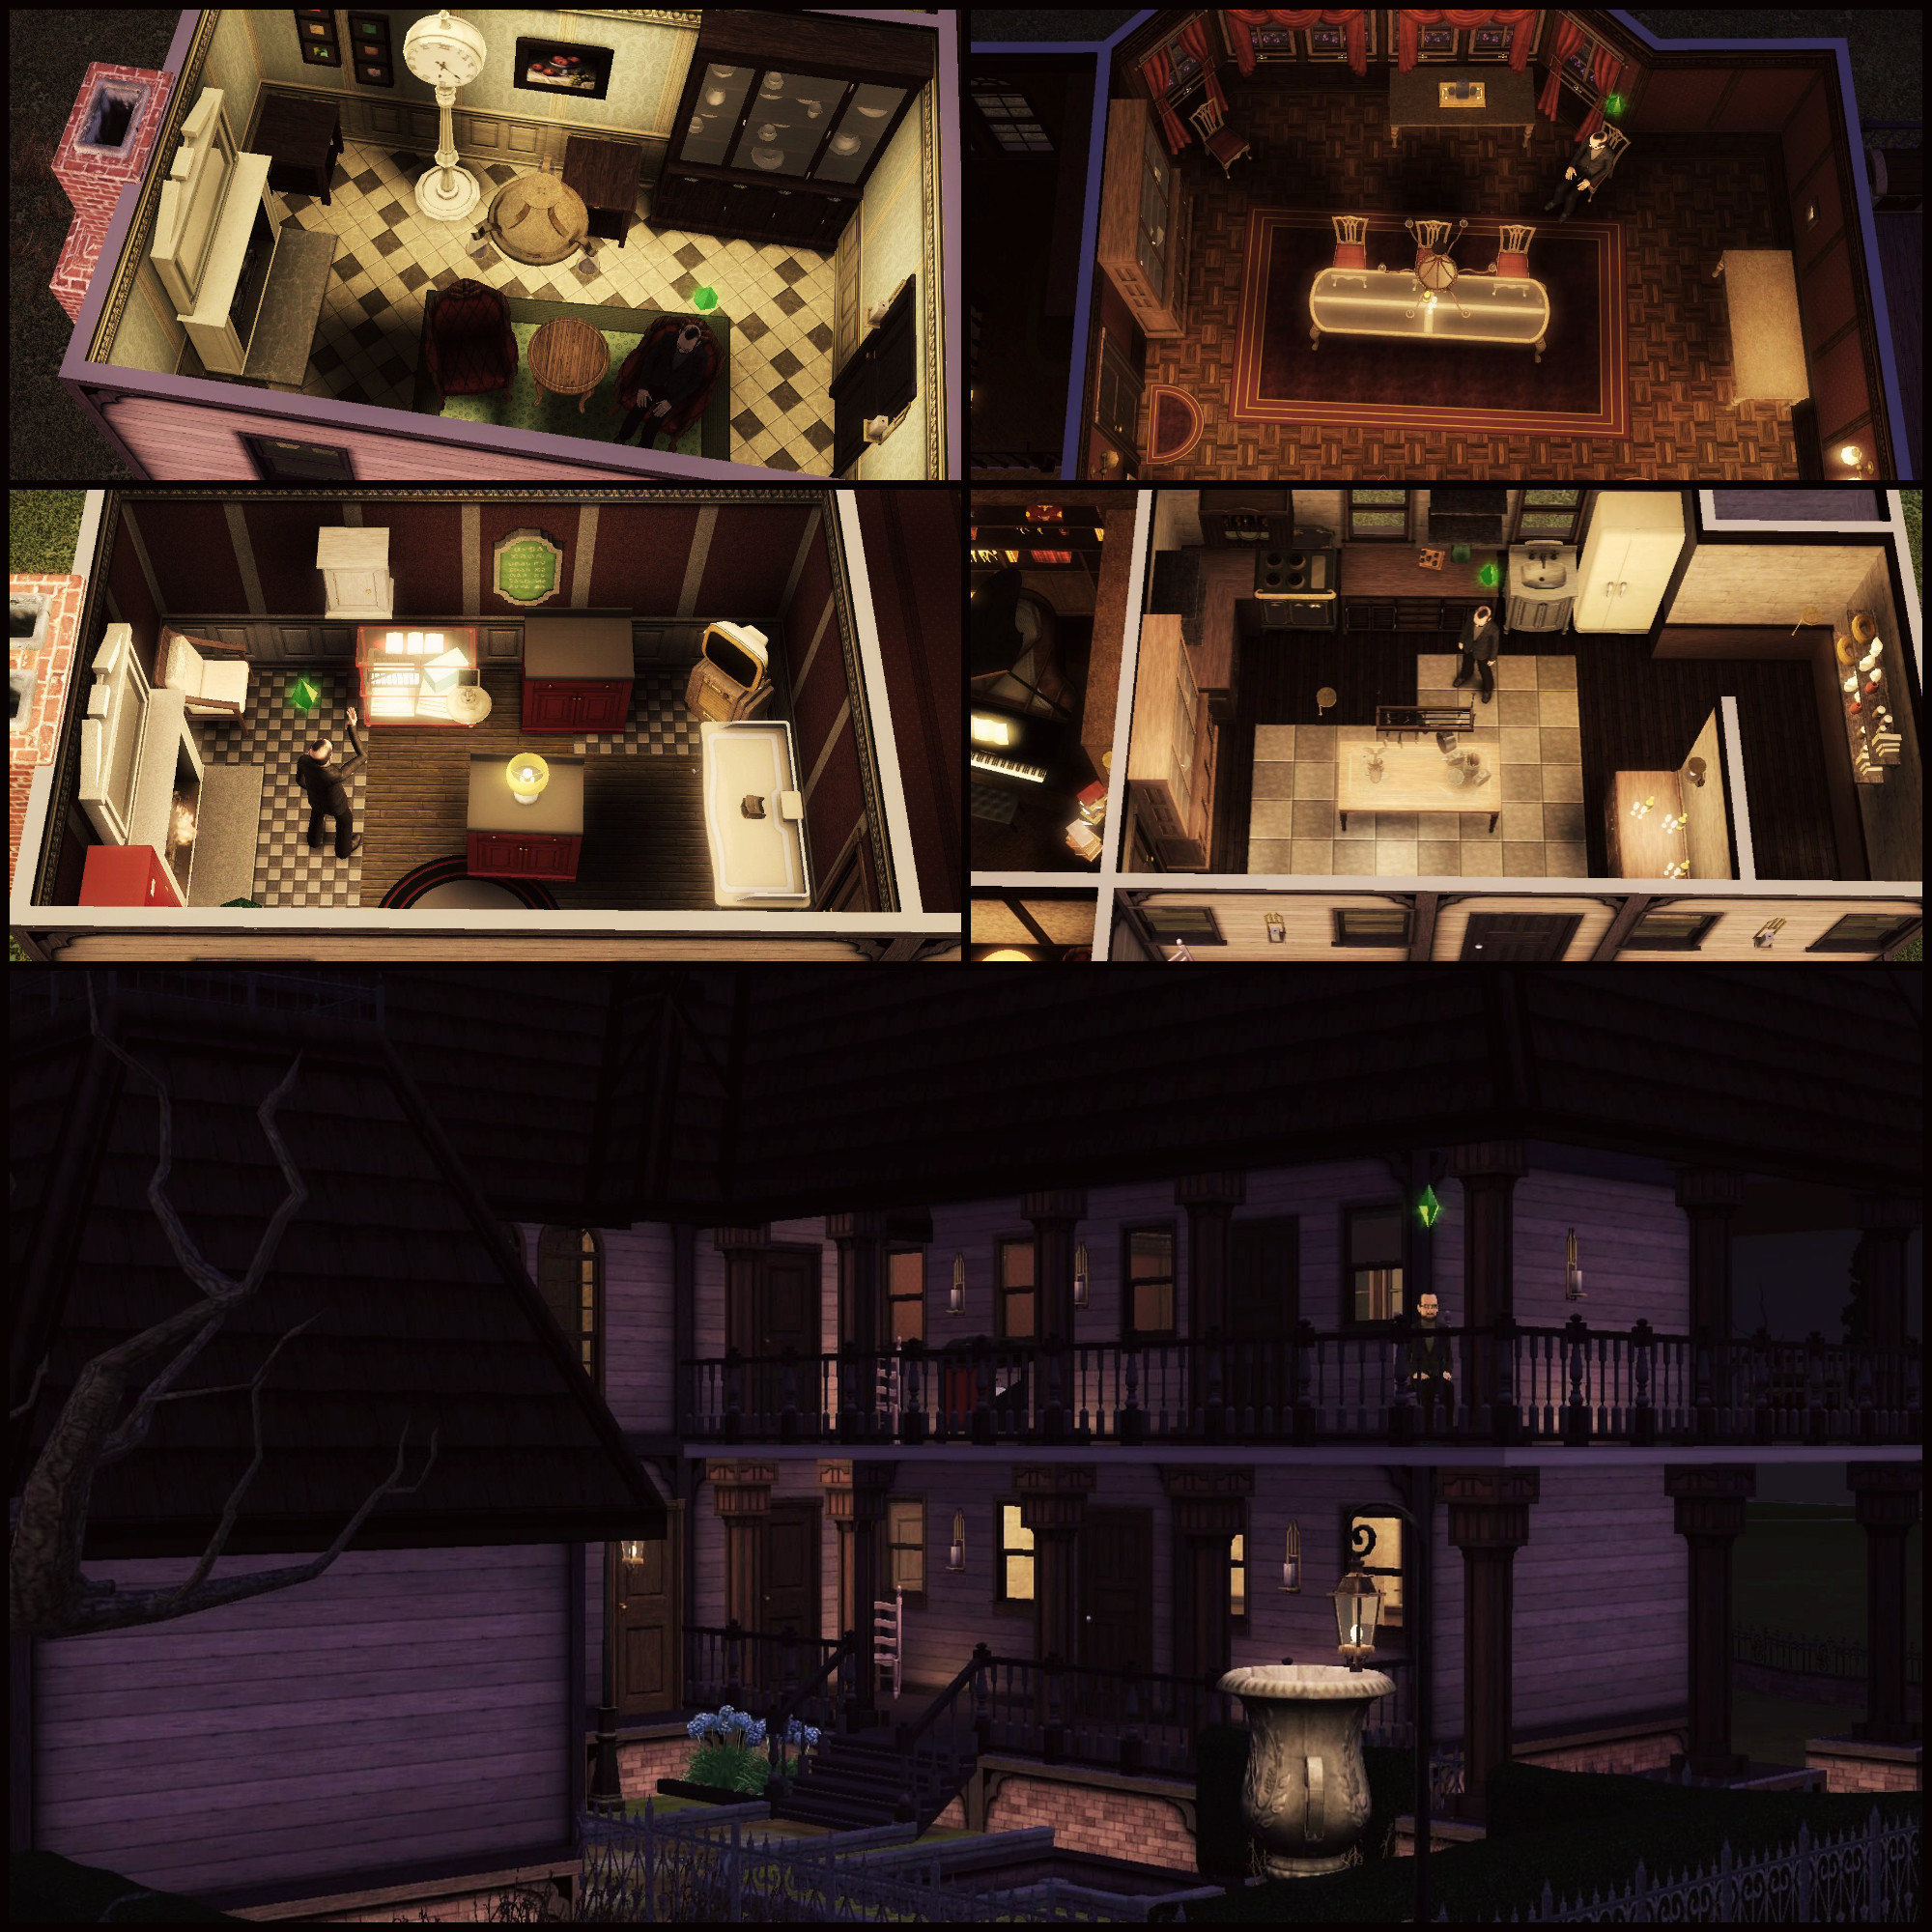 2000x2000 ... Luigi's Mansion: Gloomy Manor in The Sims 3 (3/4) by Shtinkels